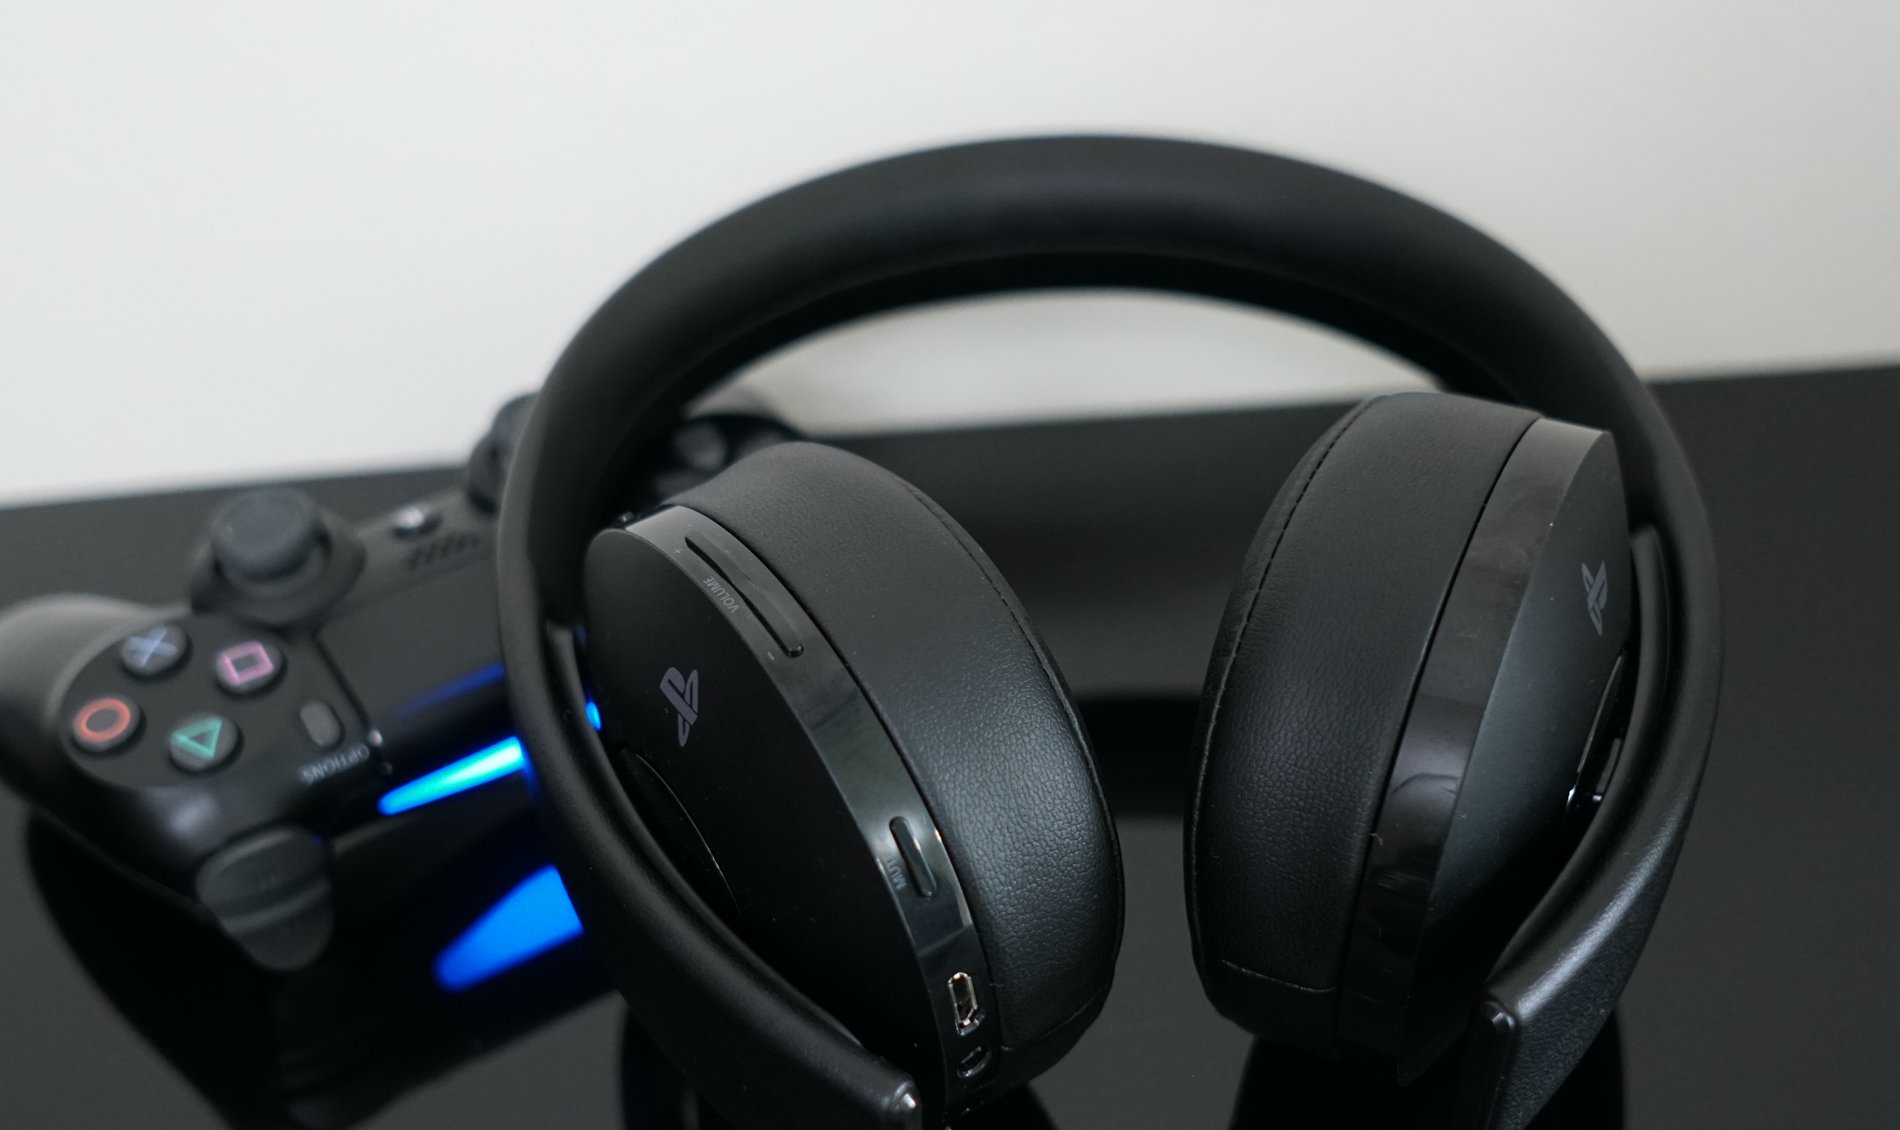 besejret værtinde energi How to Connect Bluetooth Headphones to a PS4 | Digital Trends